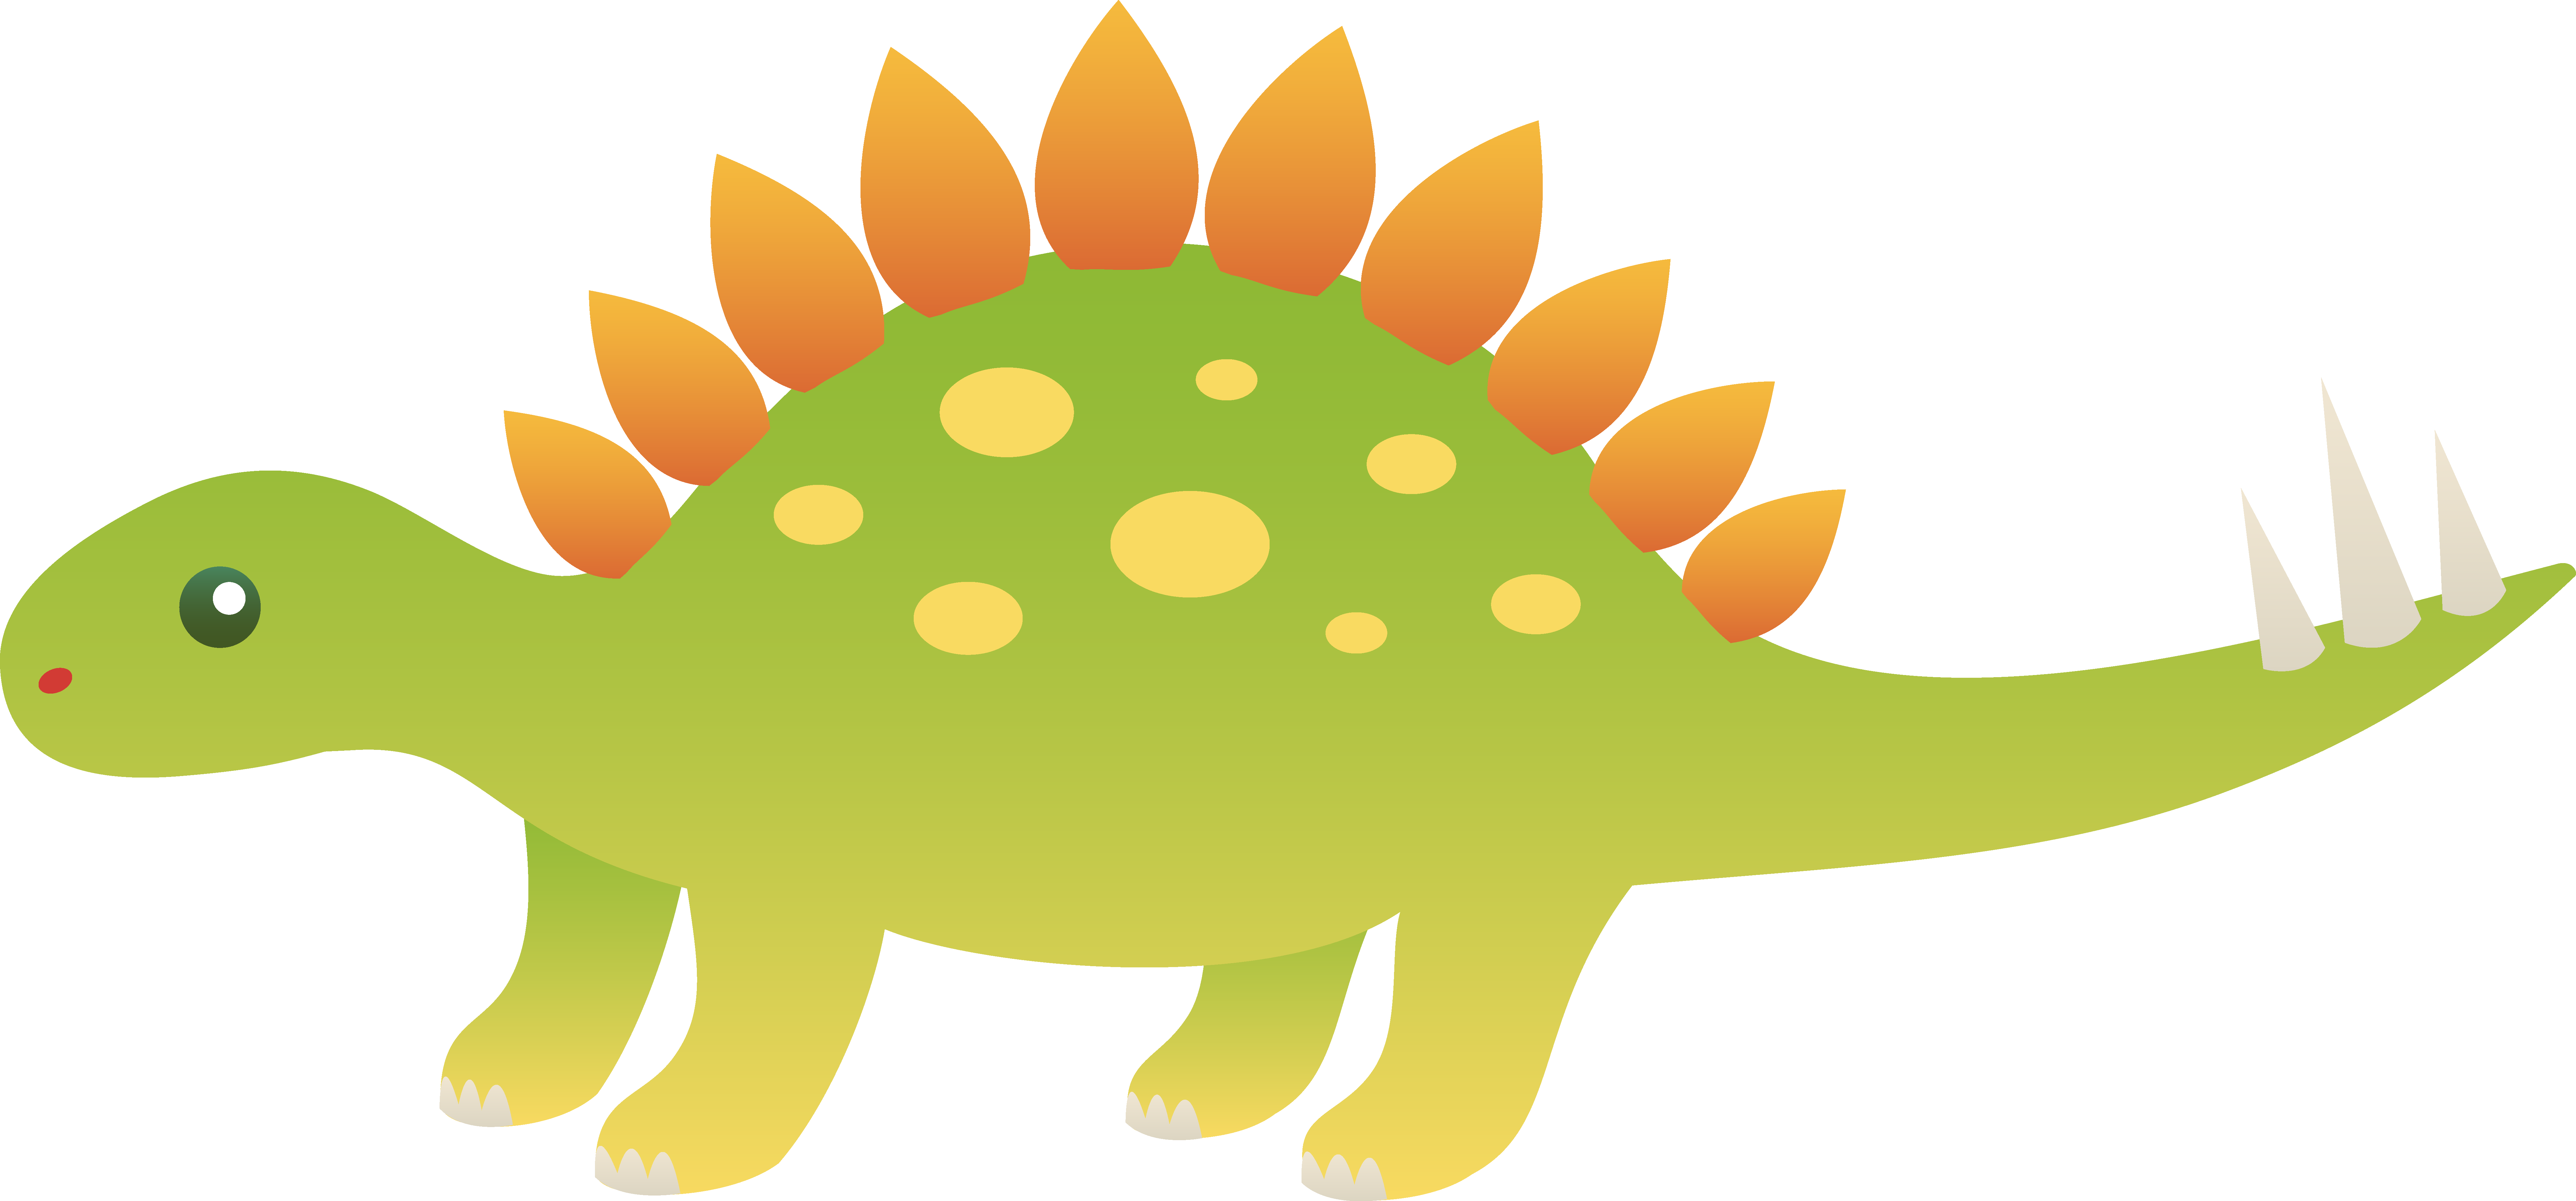 Dinosaur Border Clip Art Images & Pictures - Becuo